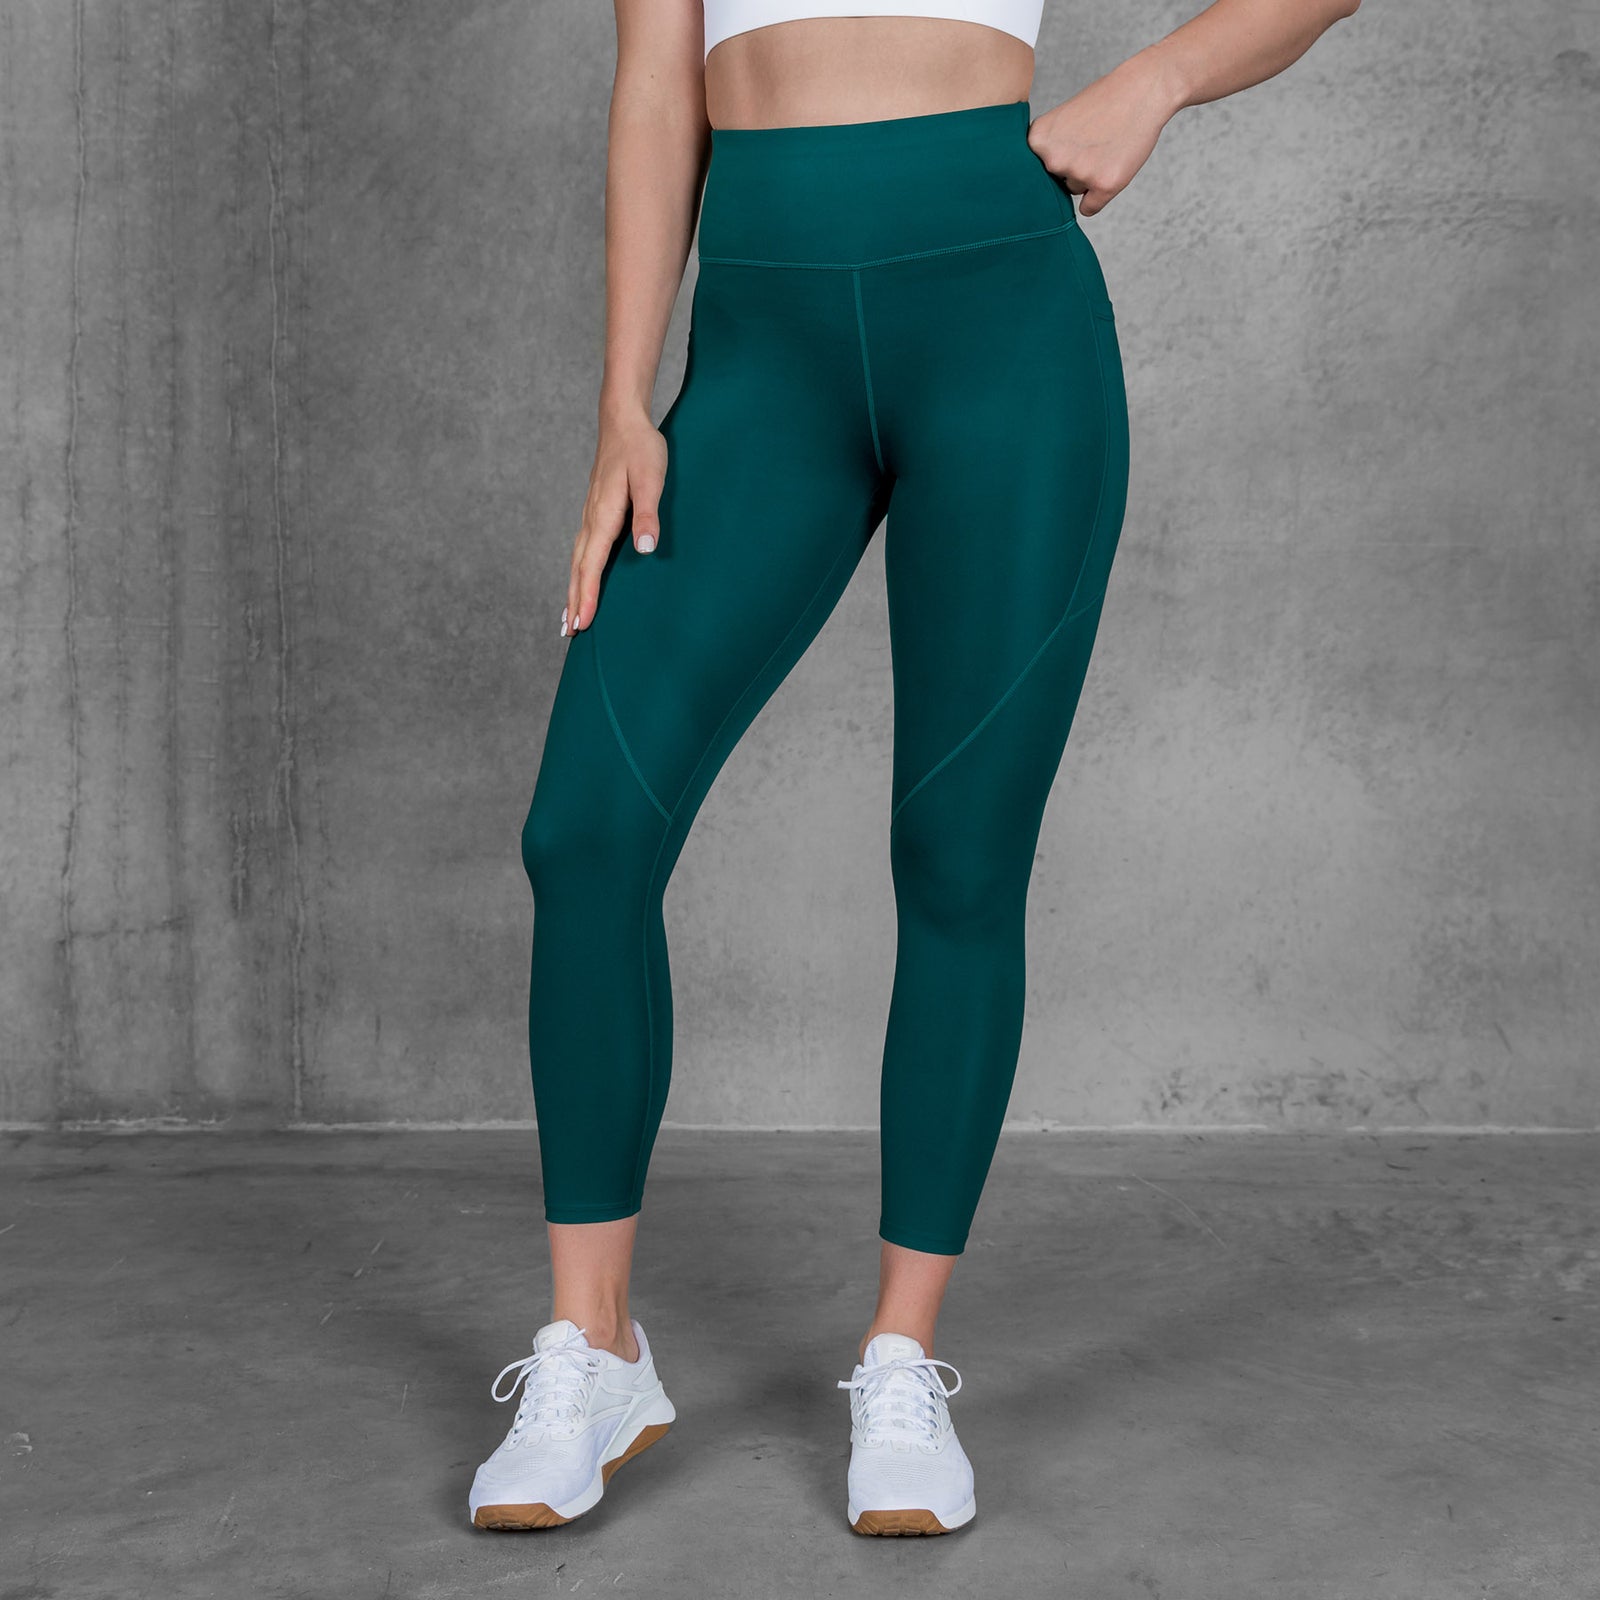 TWL - WOMEN'S ENERGY HIGH WAISTED 7/8TH TIGHTS - EMERALD GREEN –